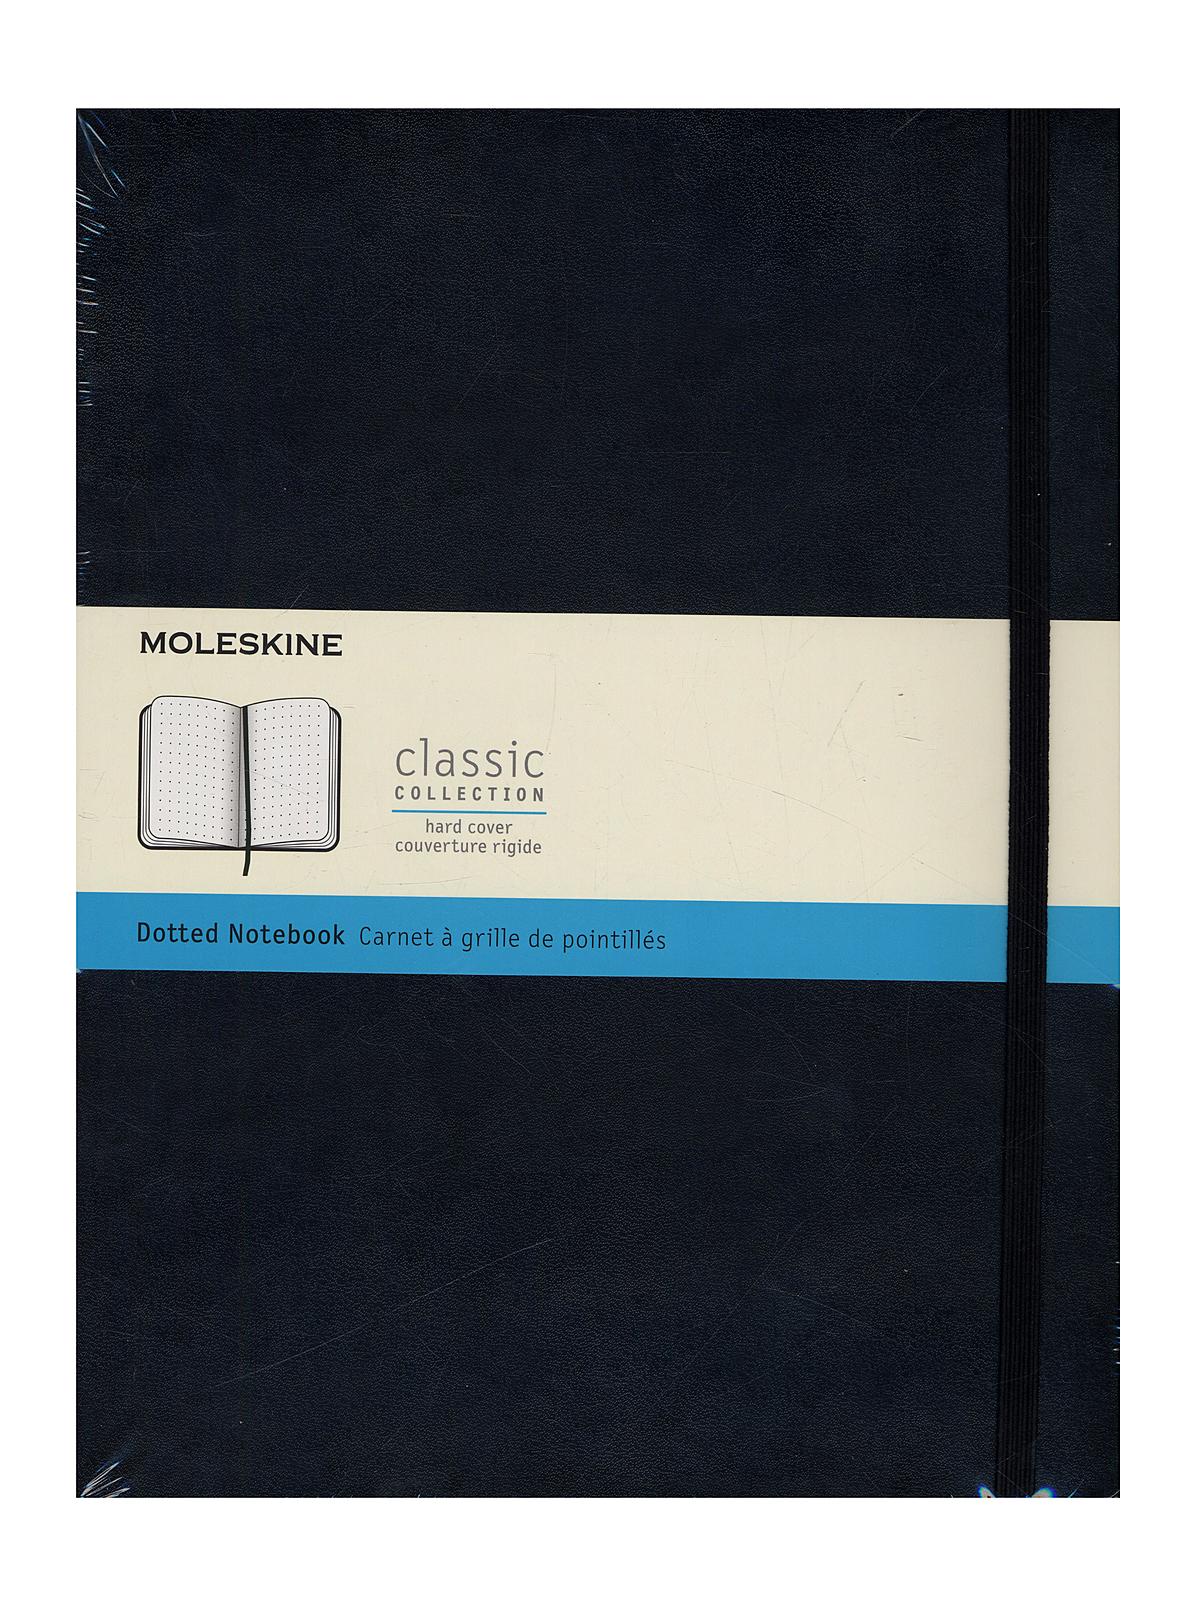 Classic Hard Cover Notebooks Black 7 1 2 In. X 9 3 4 In. 192 Pages, Dotted